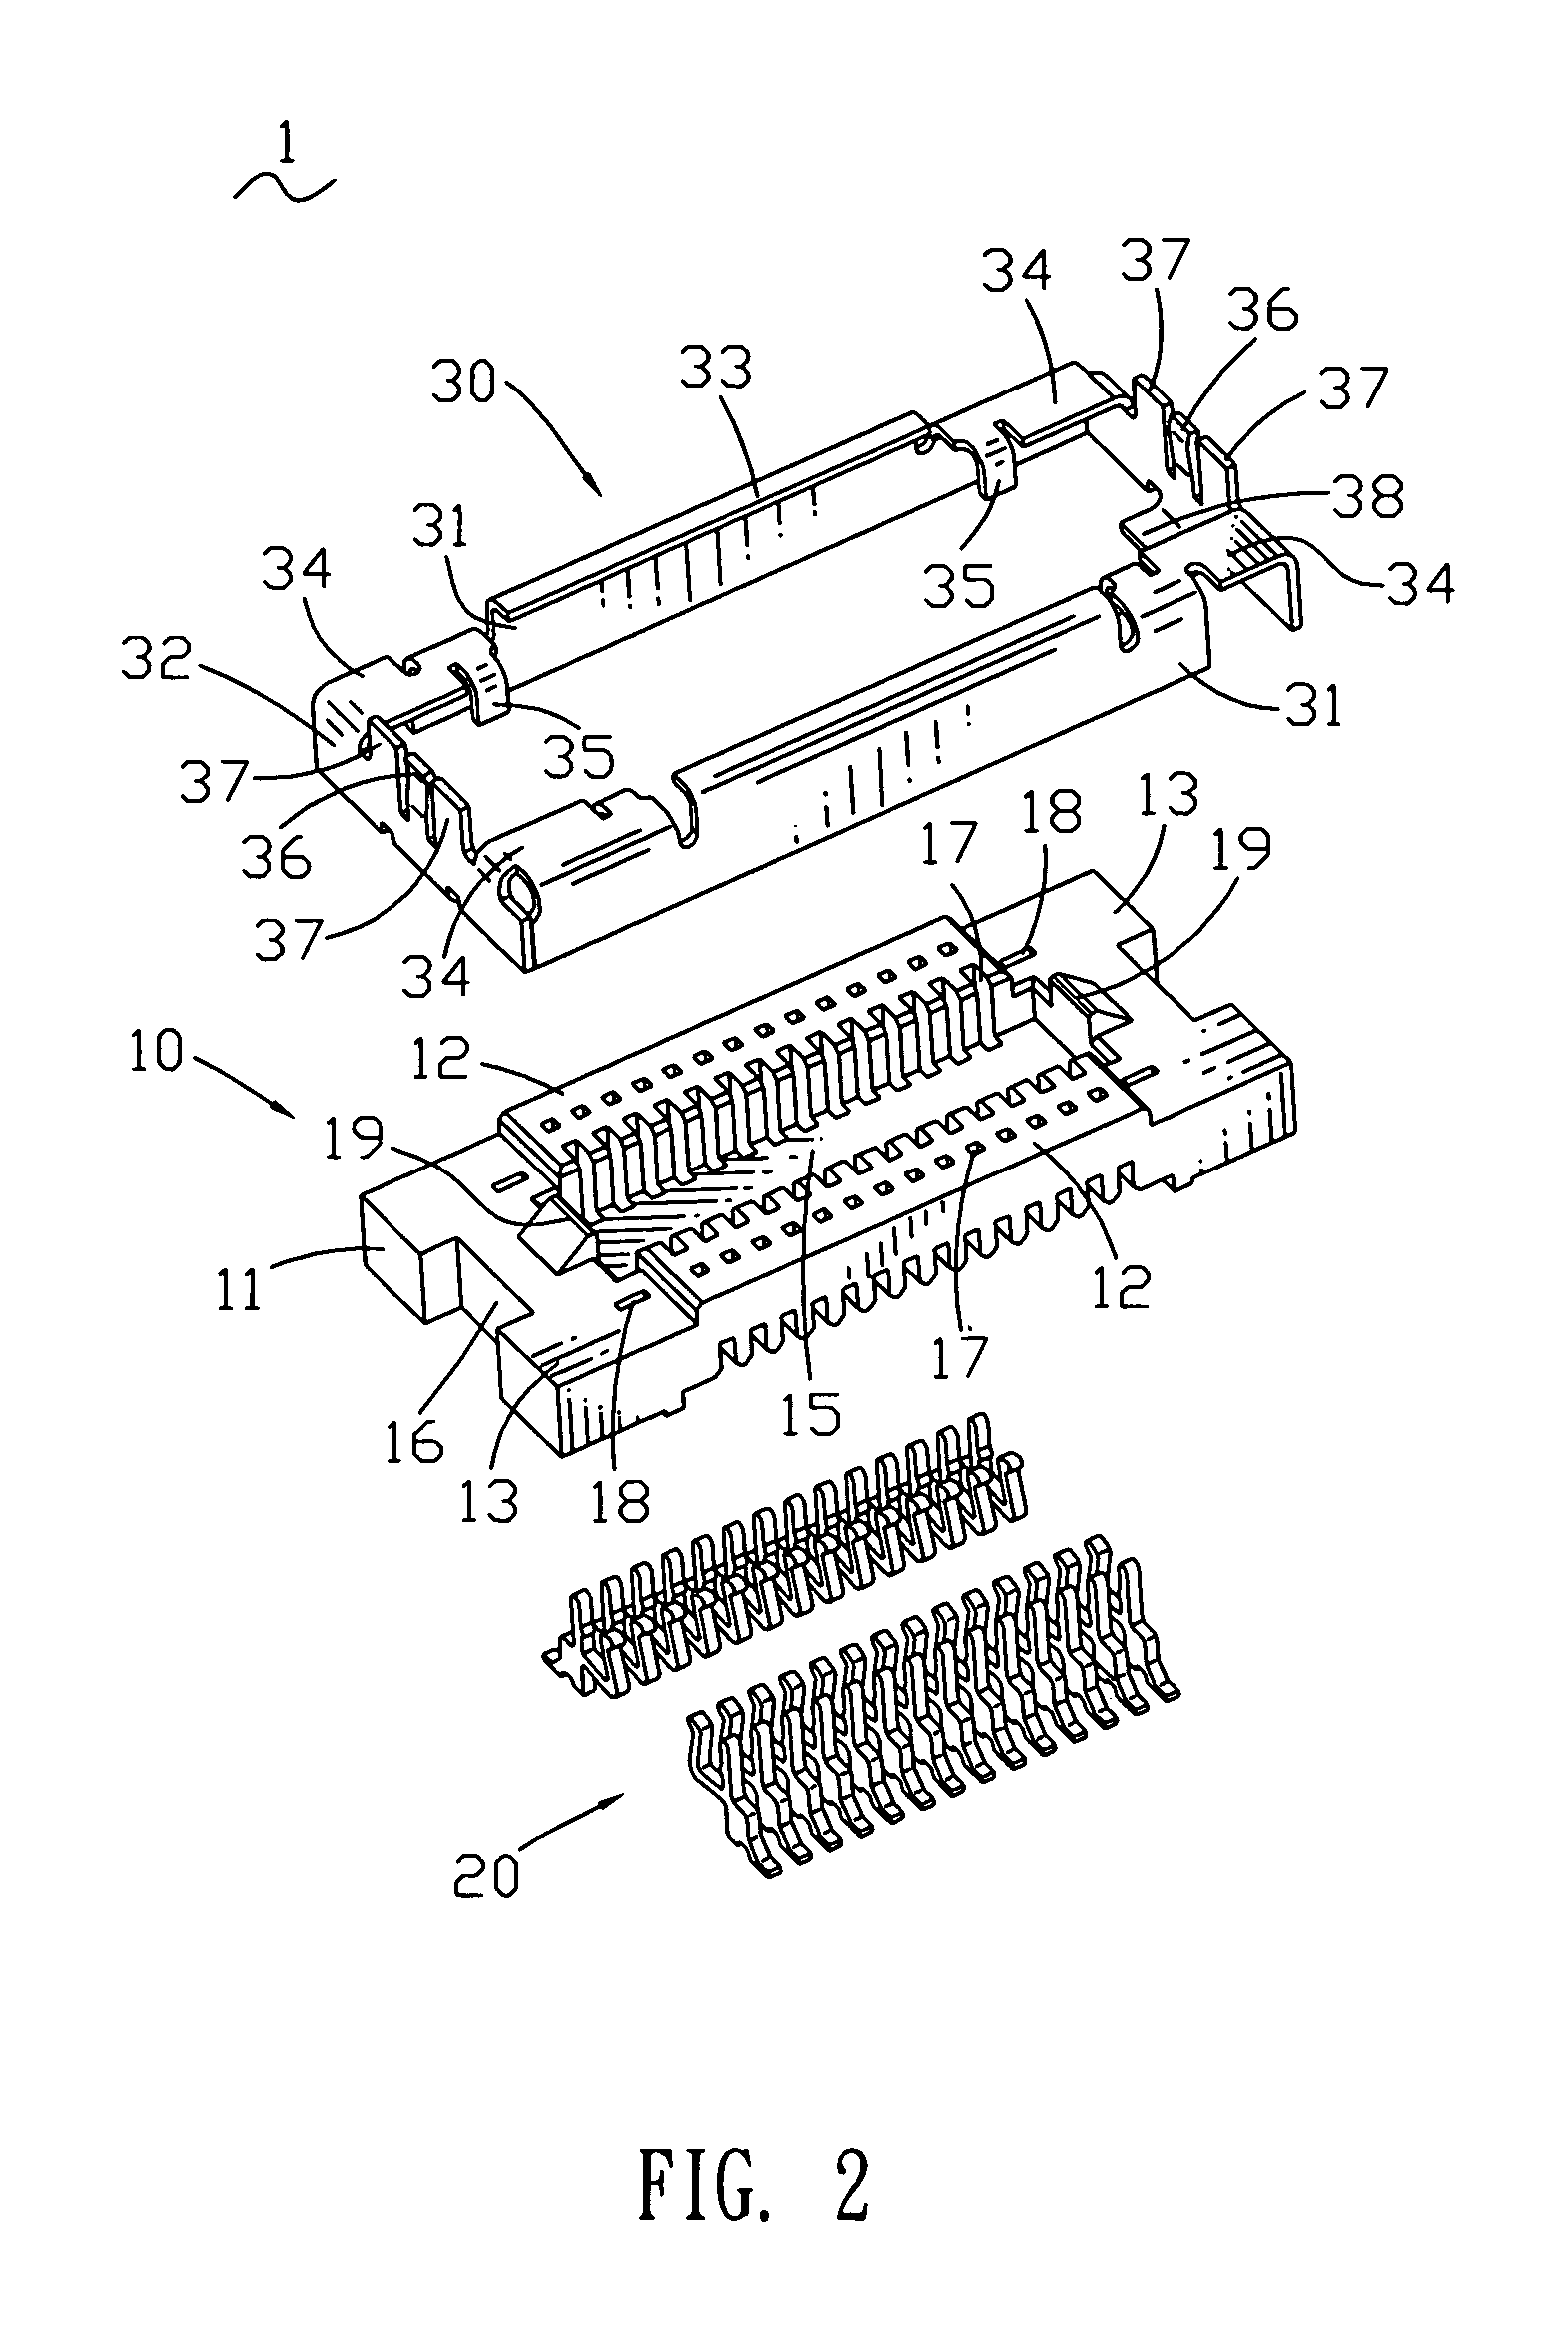 Board-to-board connector assembly with EMI shielding shields